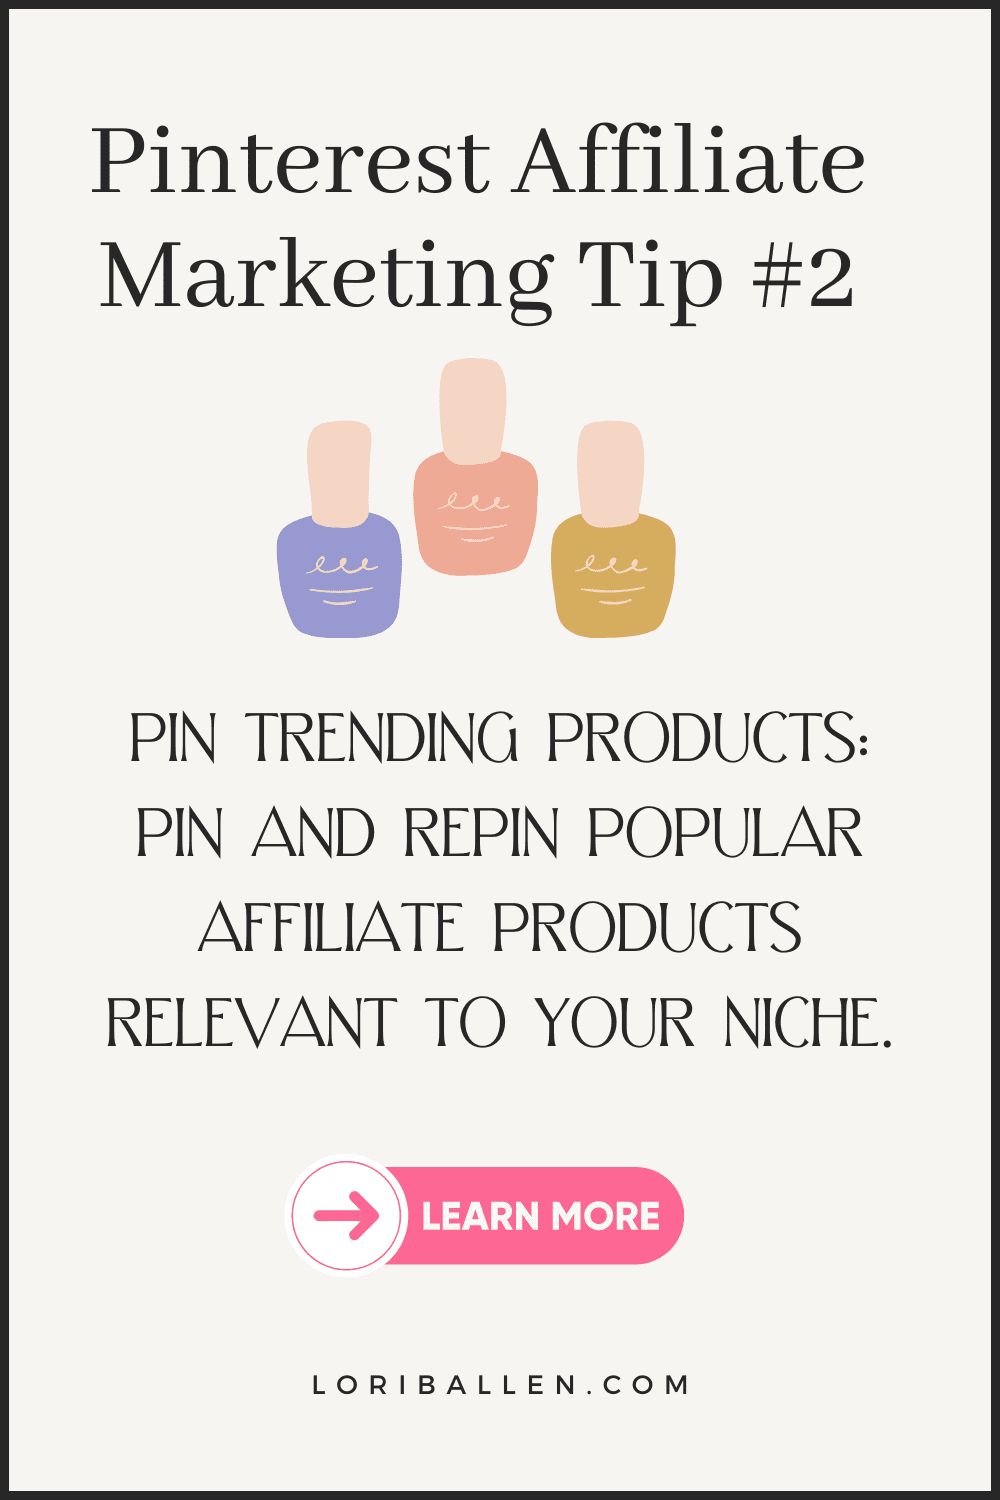 Pin Trending Products: Pin and repin popular affiliate products relevant to your niche